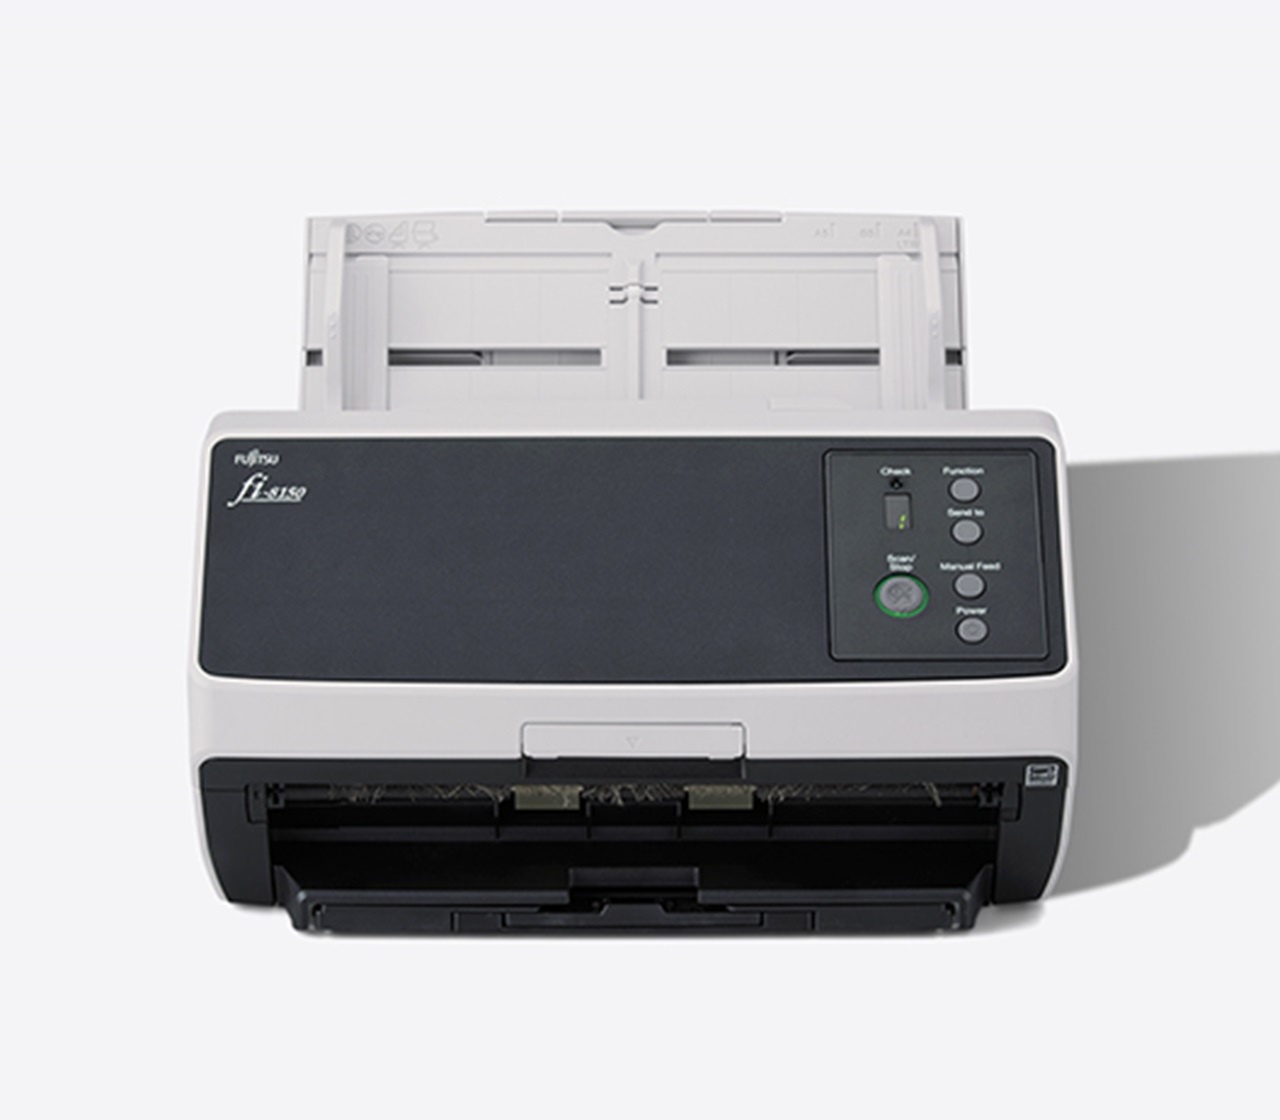 fi-8150: Automatic Document Feeding Desktop Scanner with Clear Image